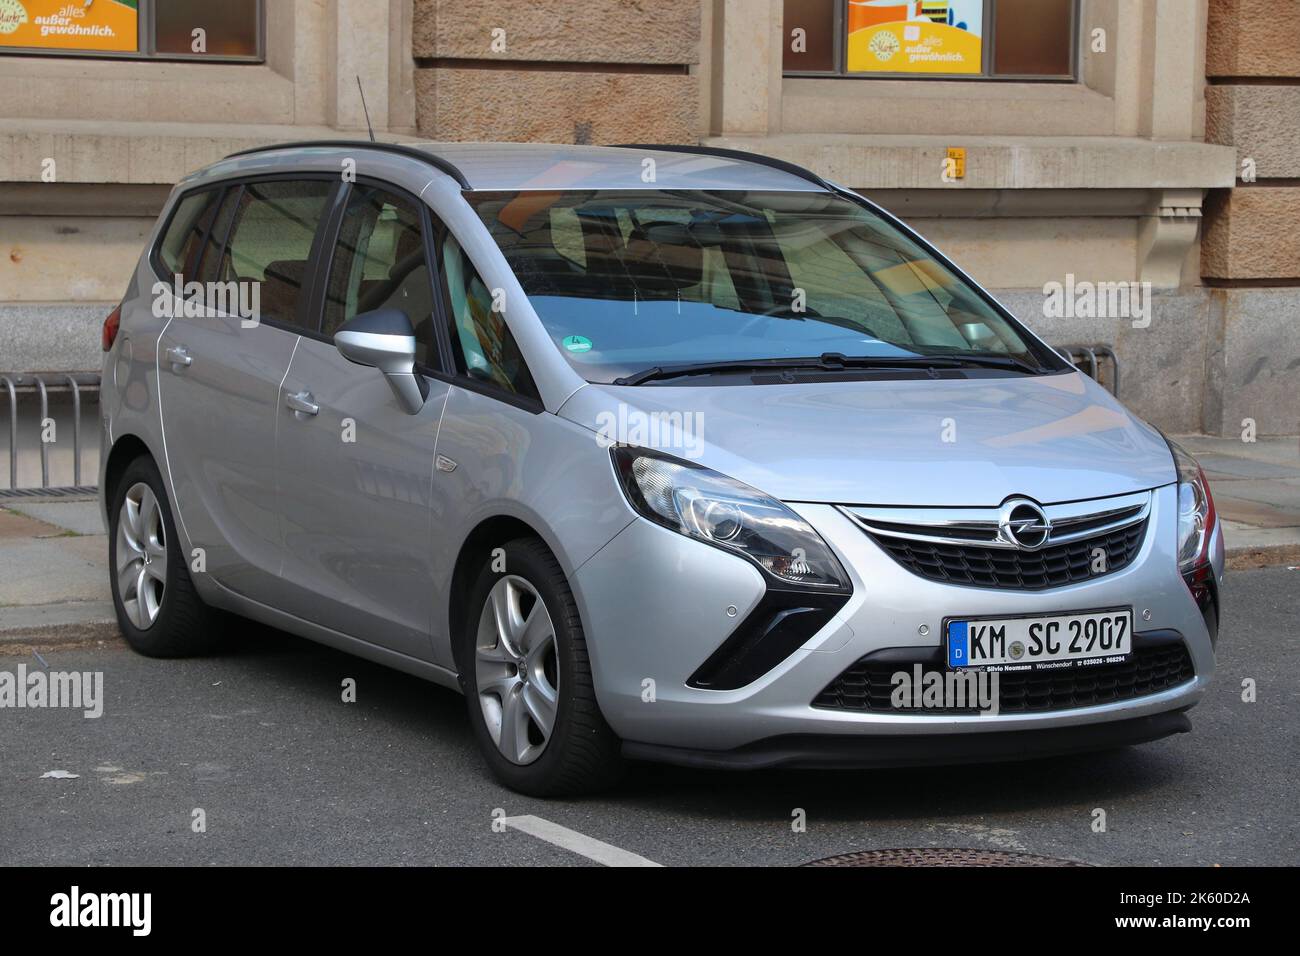 DRESDEN, GERMANY - MAY 10, 2018: Opel Zafira compact MPV family car parked in Germany. There were 45.8 million cars registered in Germany (as of 2017) Stock Photo